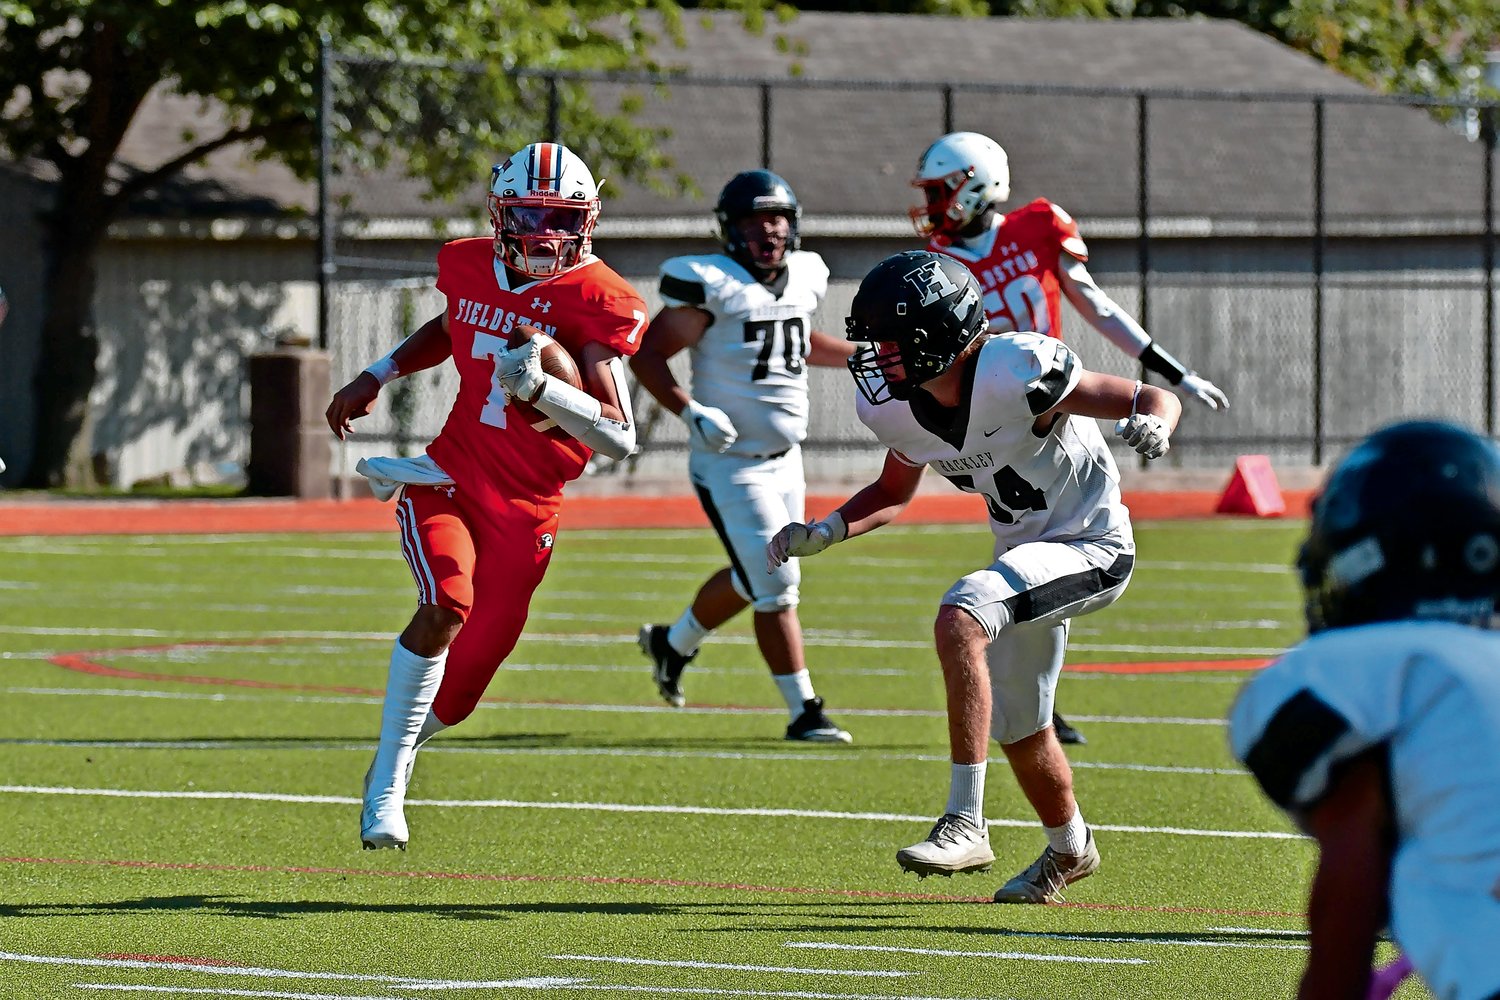 Fieldston quarterback Wes Heiman rushes past a Hackley defender during Saturday’s home opener. He wound up with 115 all-purpose yards.